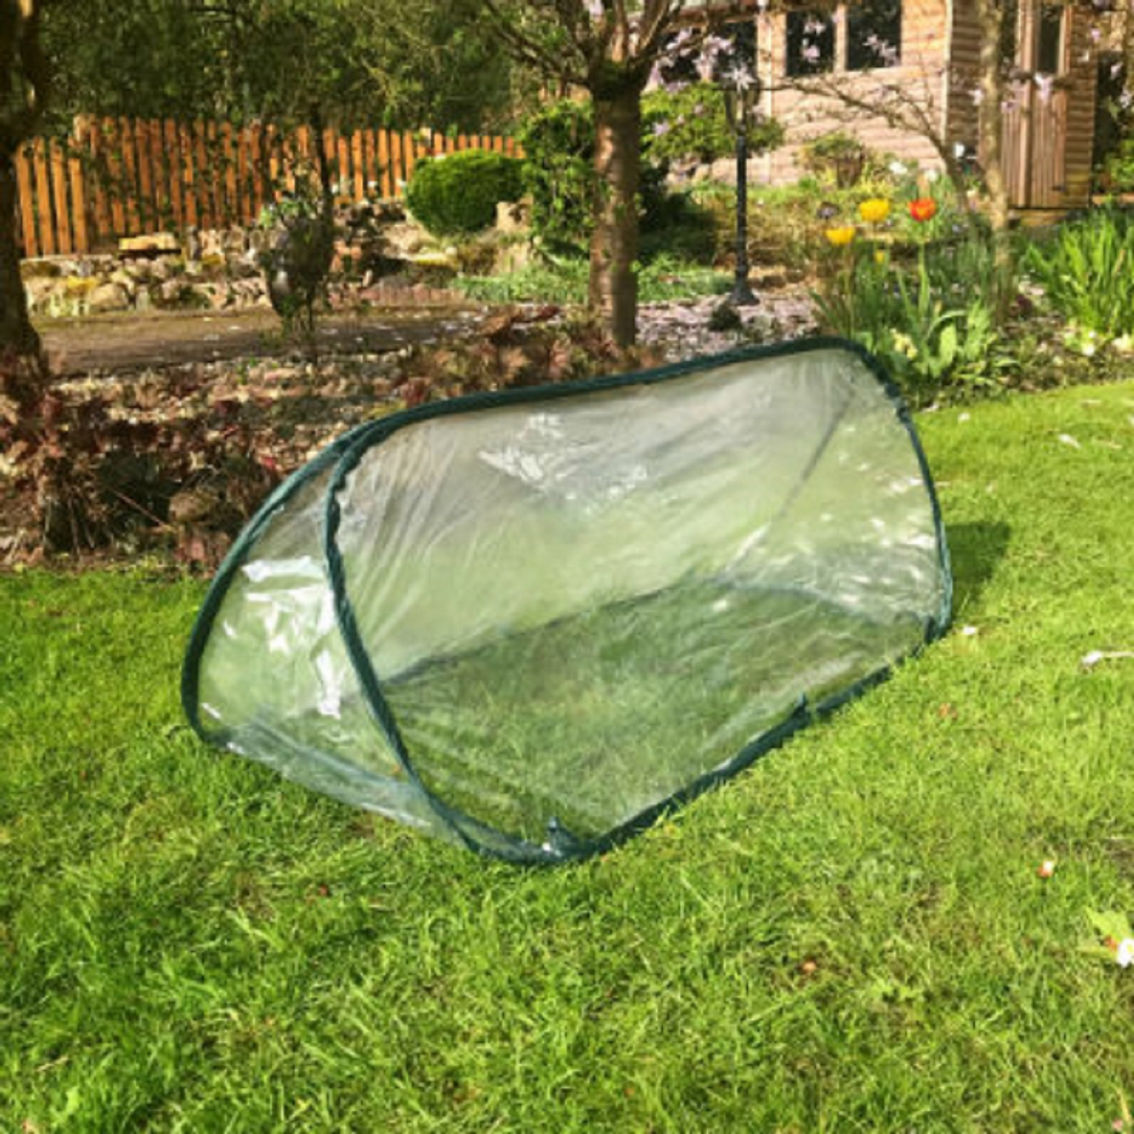 Bosmere Plastic Pop Up Insect and Pest Plant Protection Net - Image 2 of 2